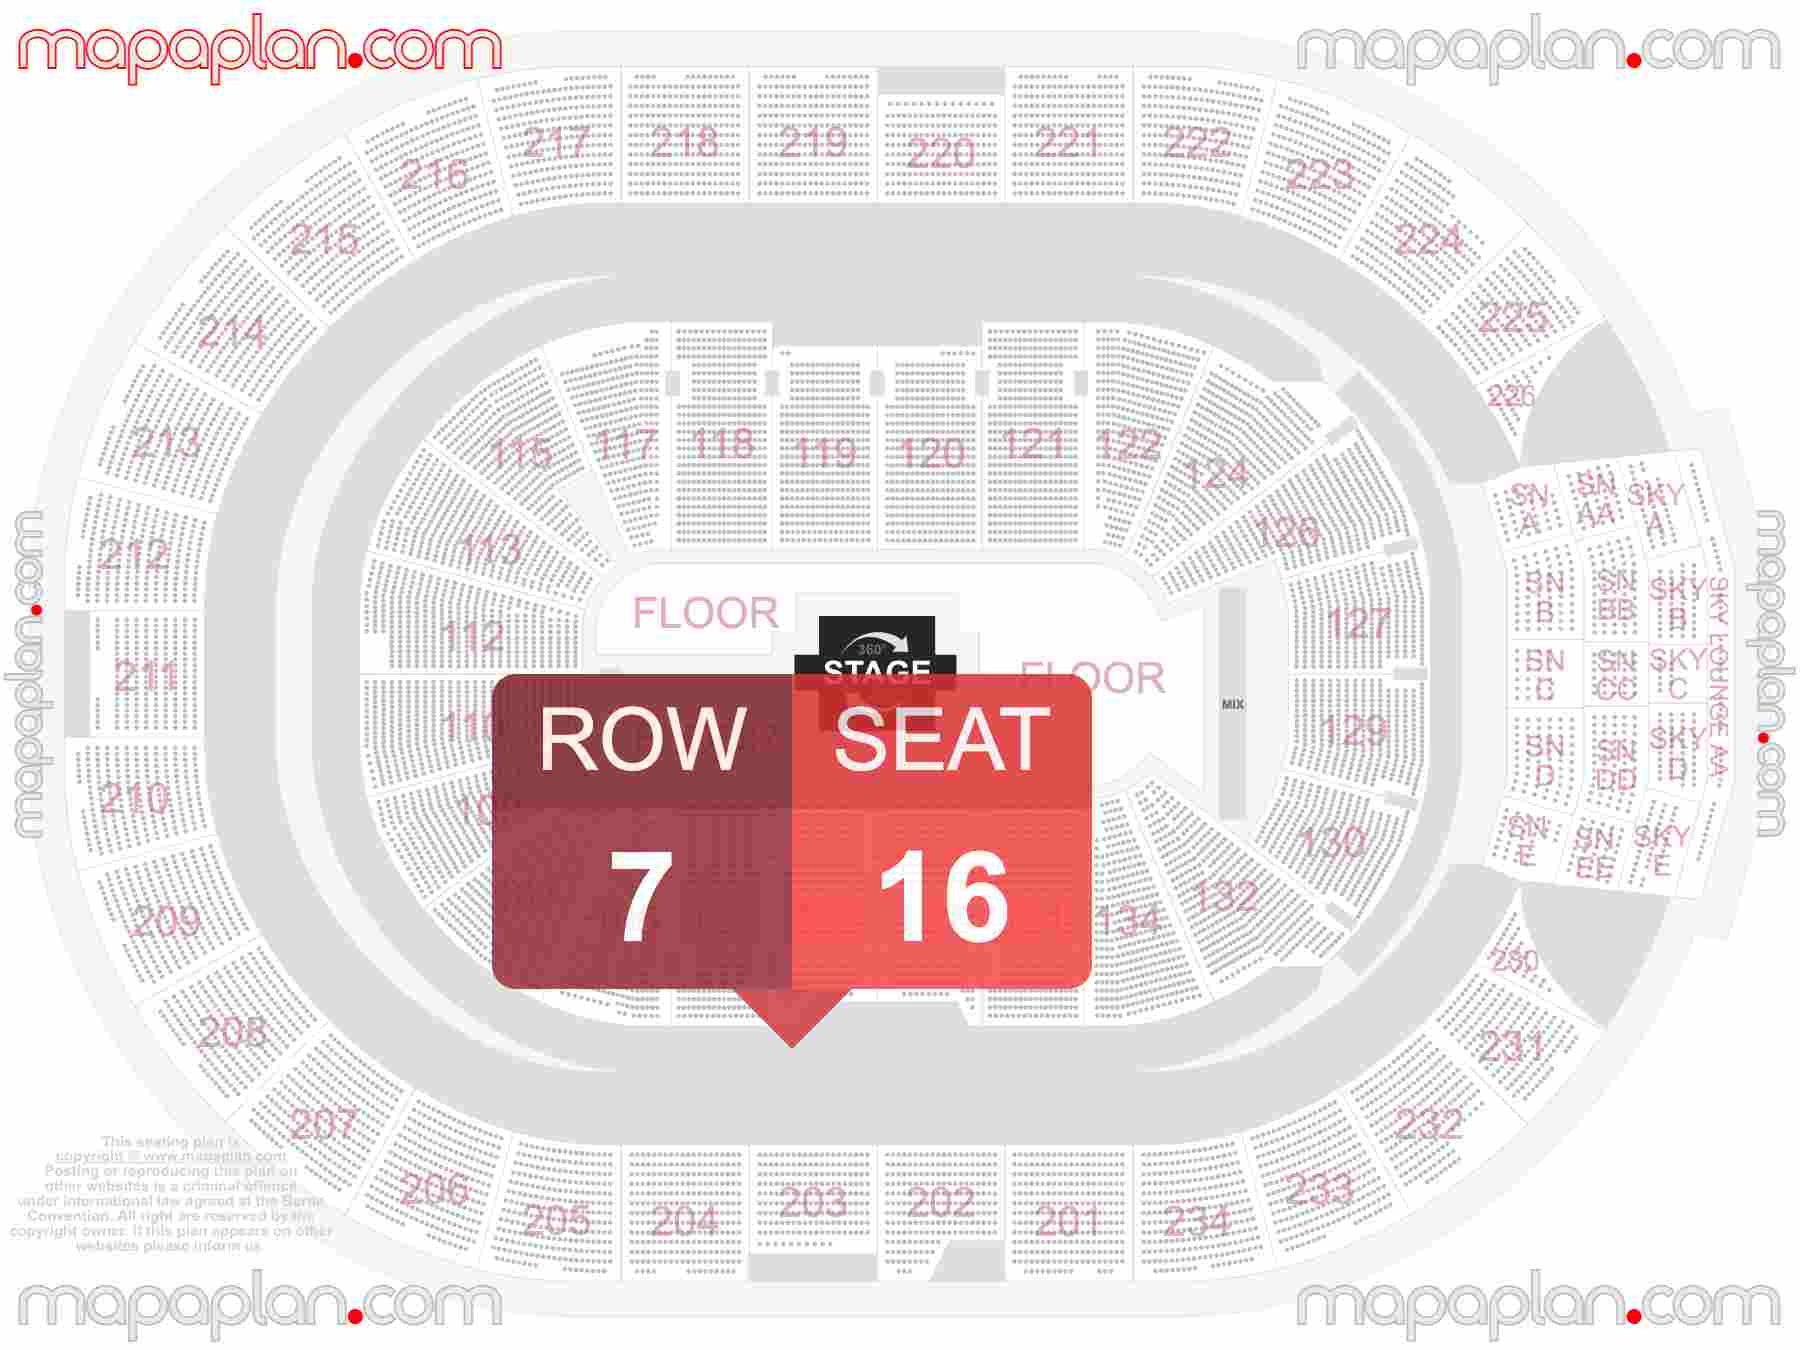 Edmonton Rogers Place seating map Concert 360 in the round stage seating chart - Interactive map to find best seat and row numbers